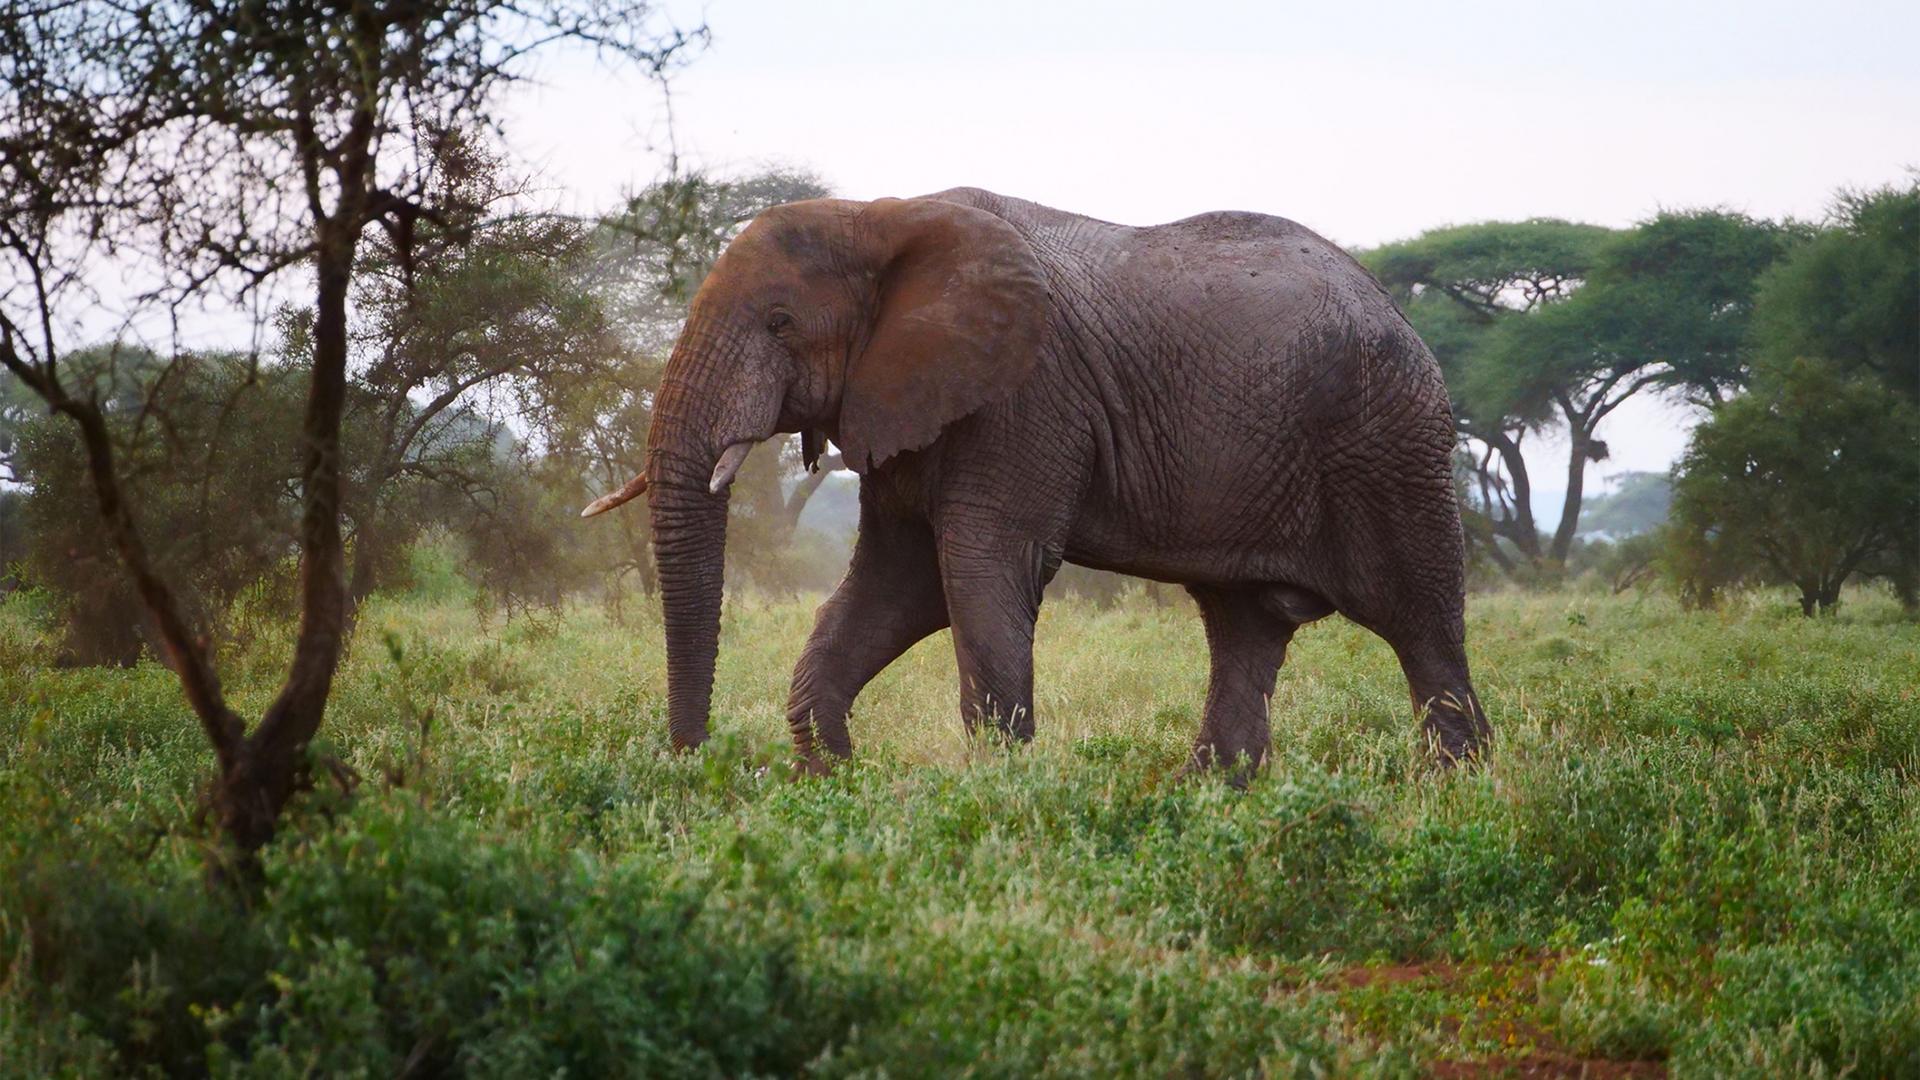 A large elephant among green trees and green grass